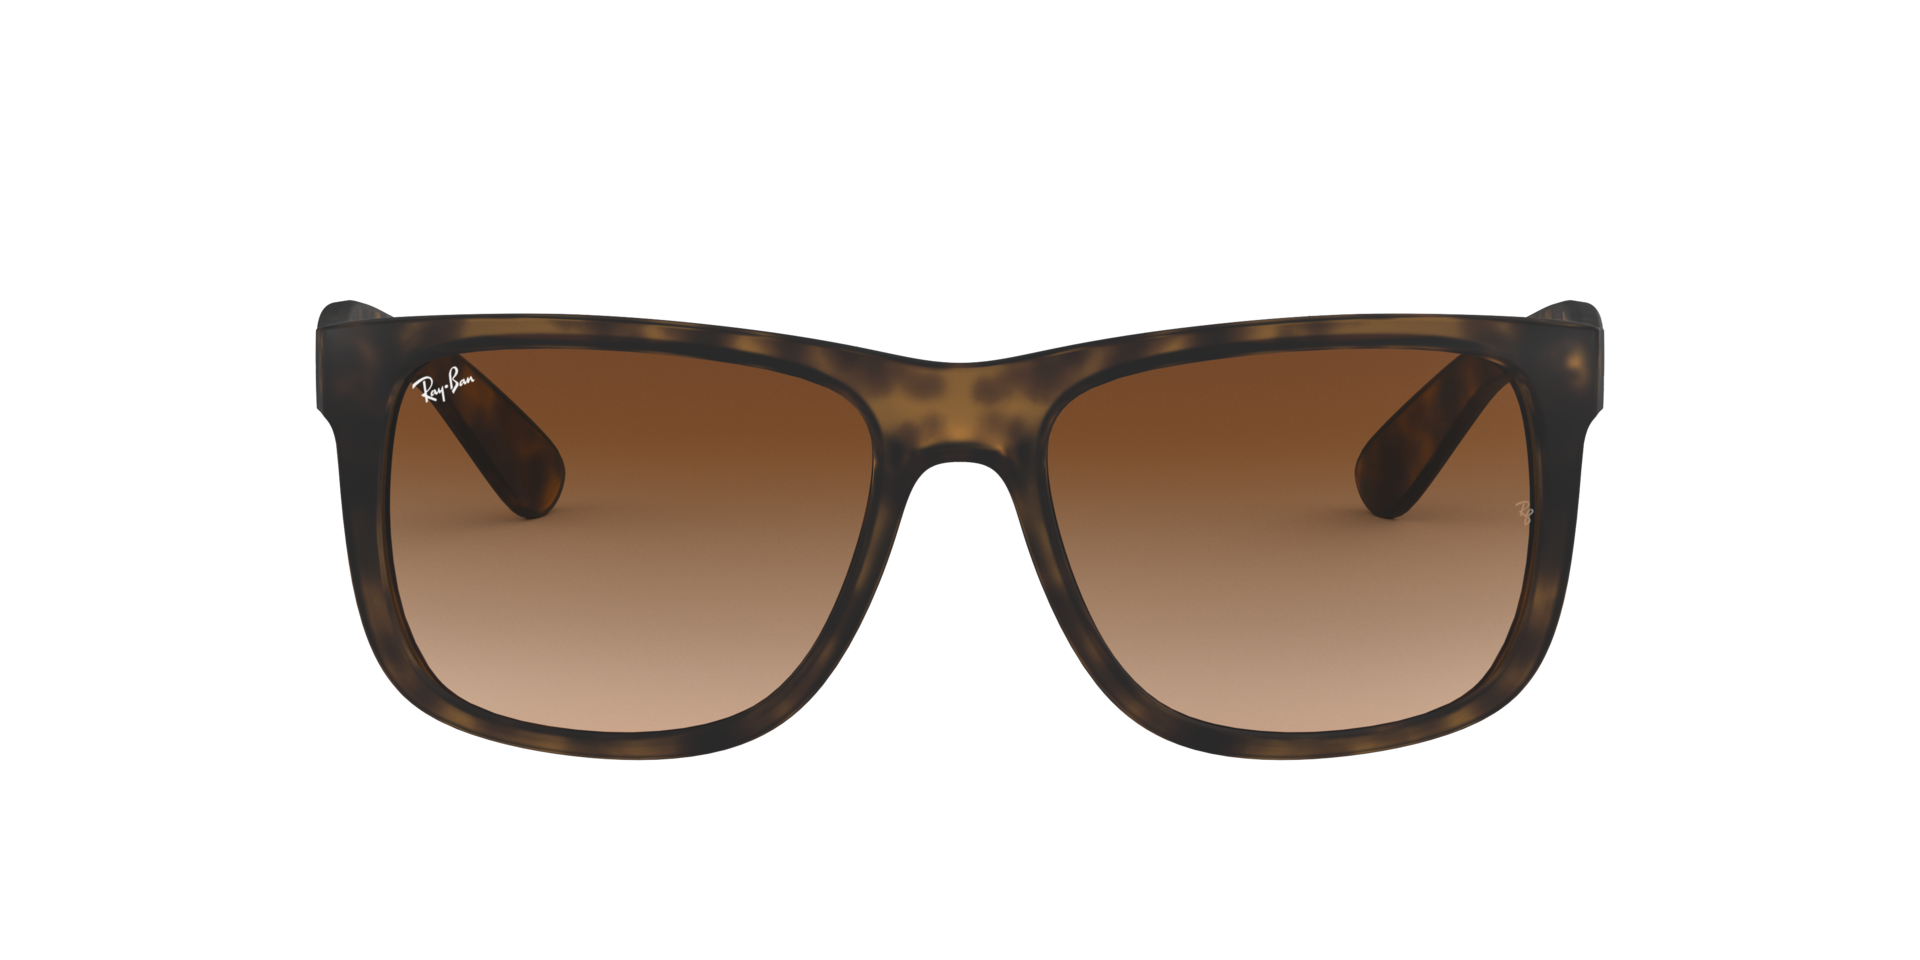 Ray Ban Justin Sonnenbrille RB4165 710/13 55